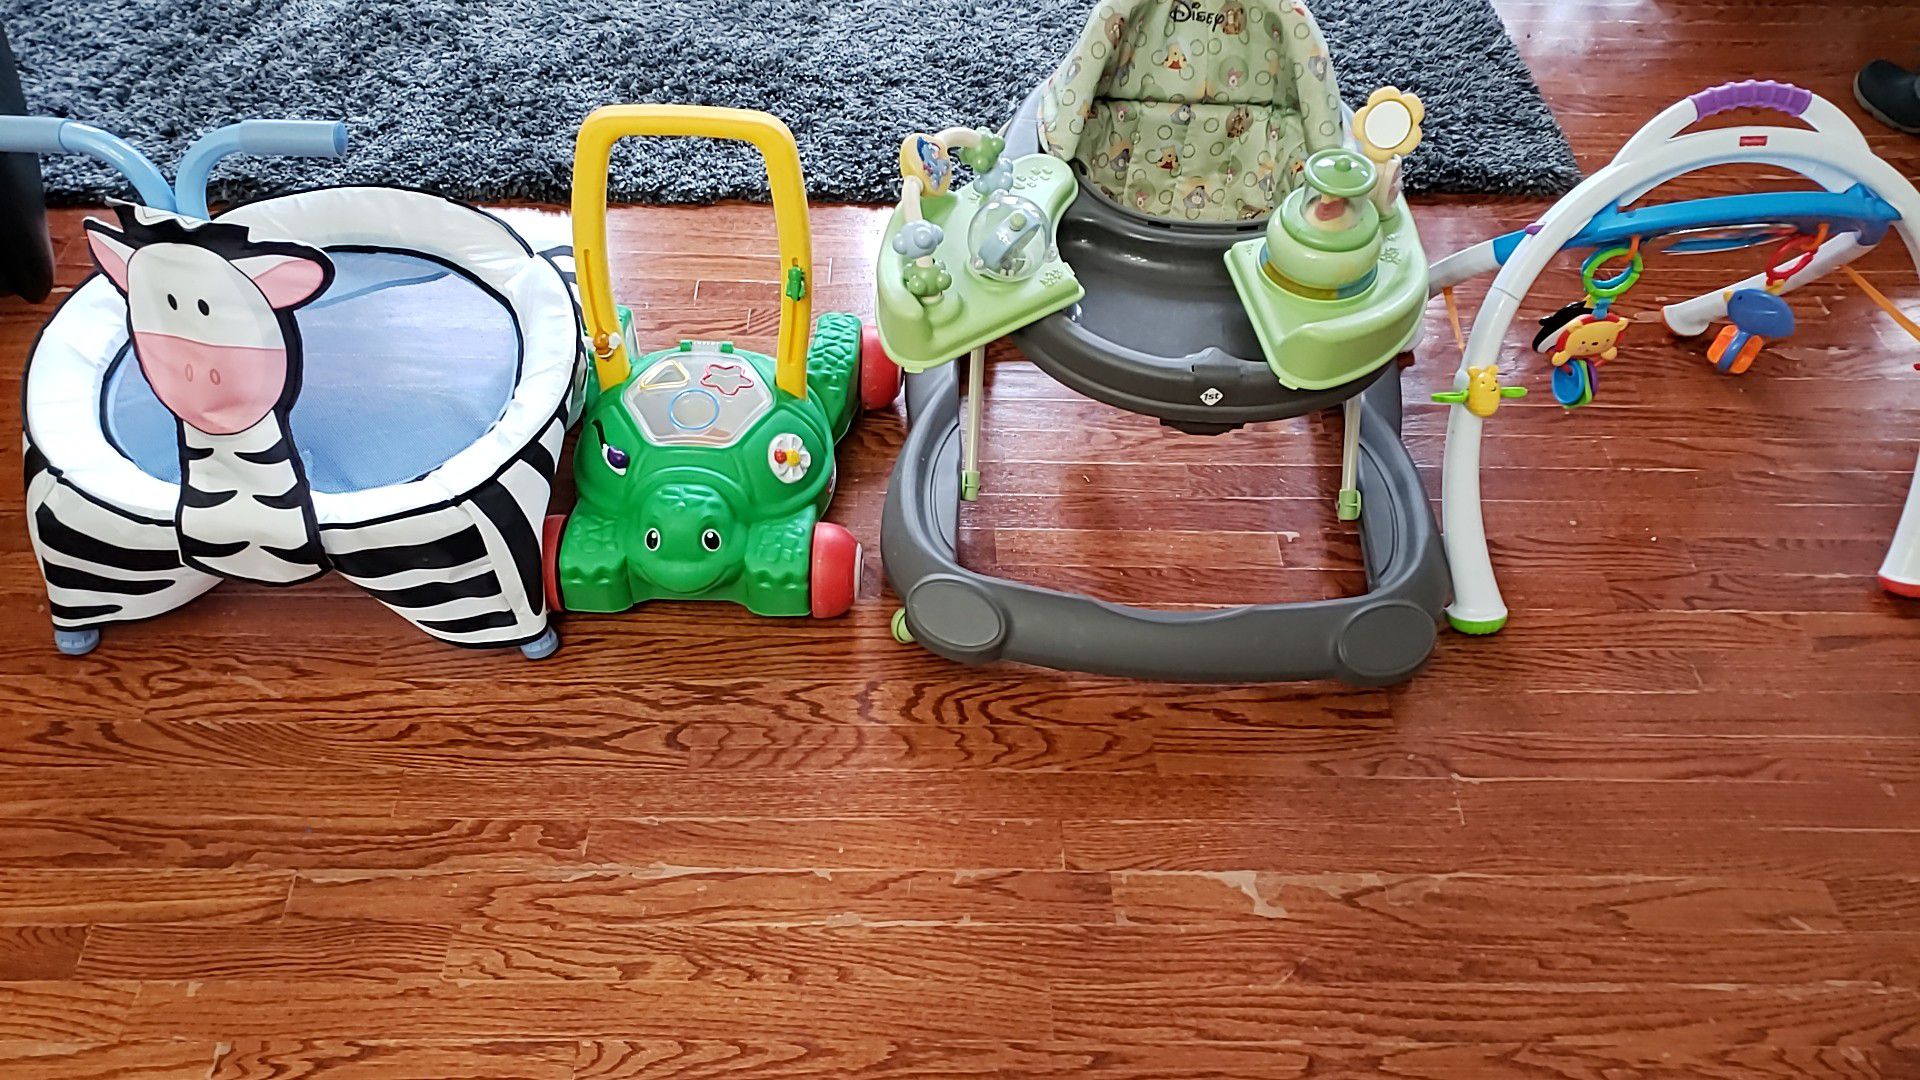 Baby / toddler toys all for $10